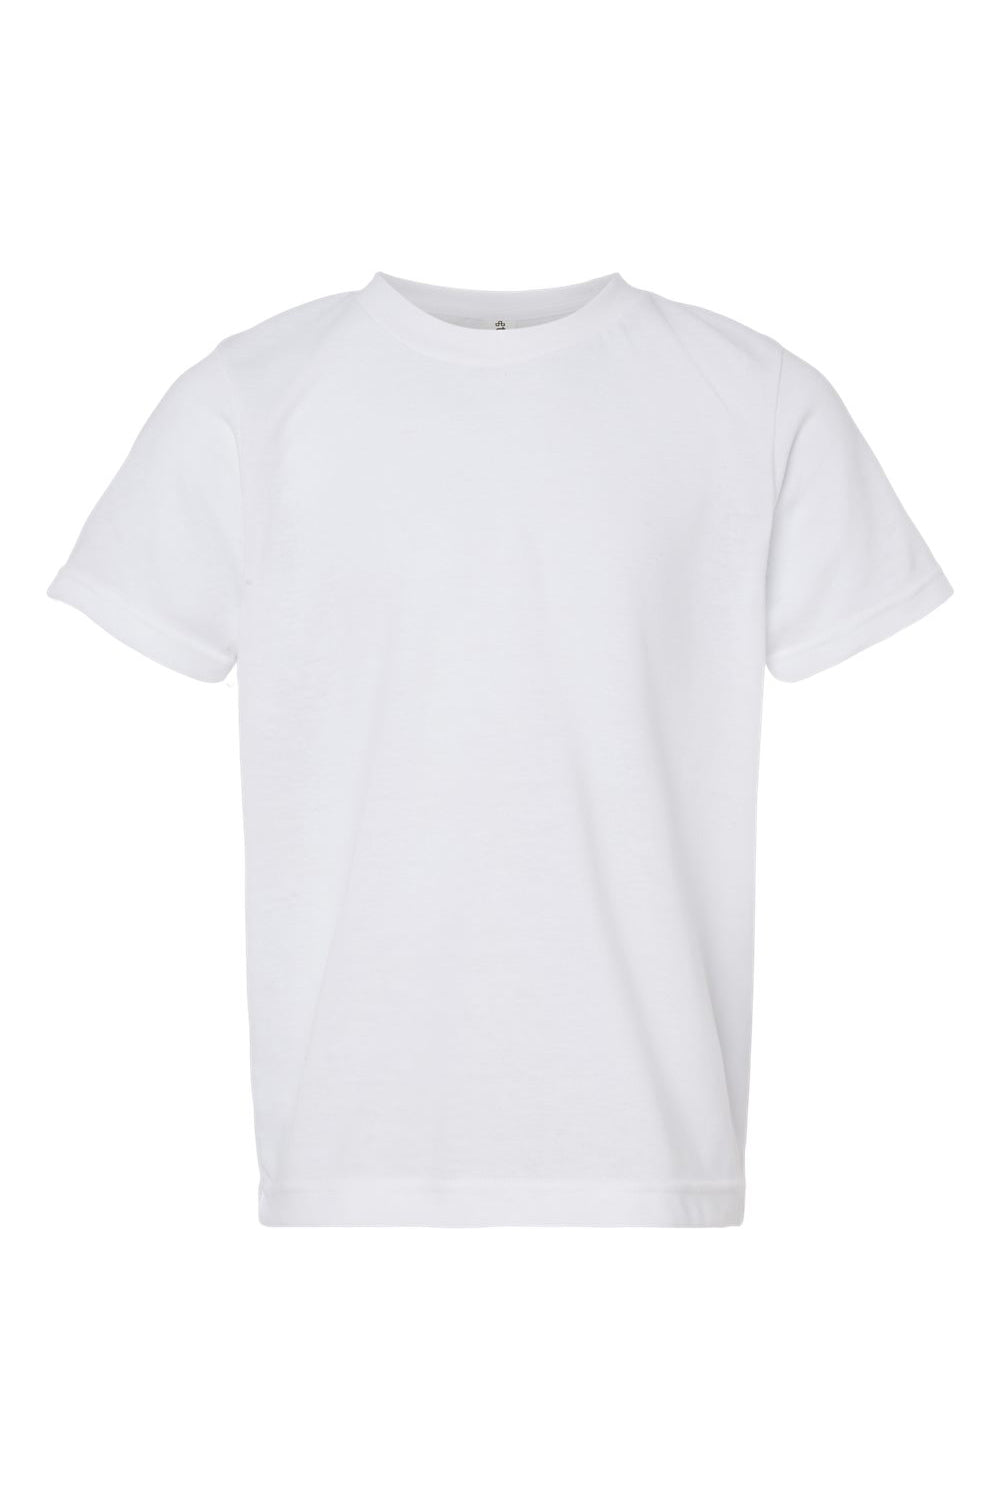 Tultex 265 Youth Poly-Rich Short Sleeve Crewneck T-Shirt White Flat Front